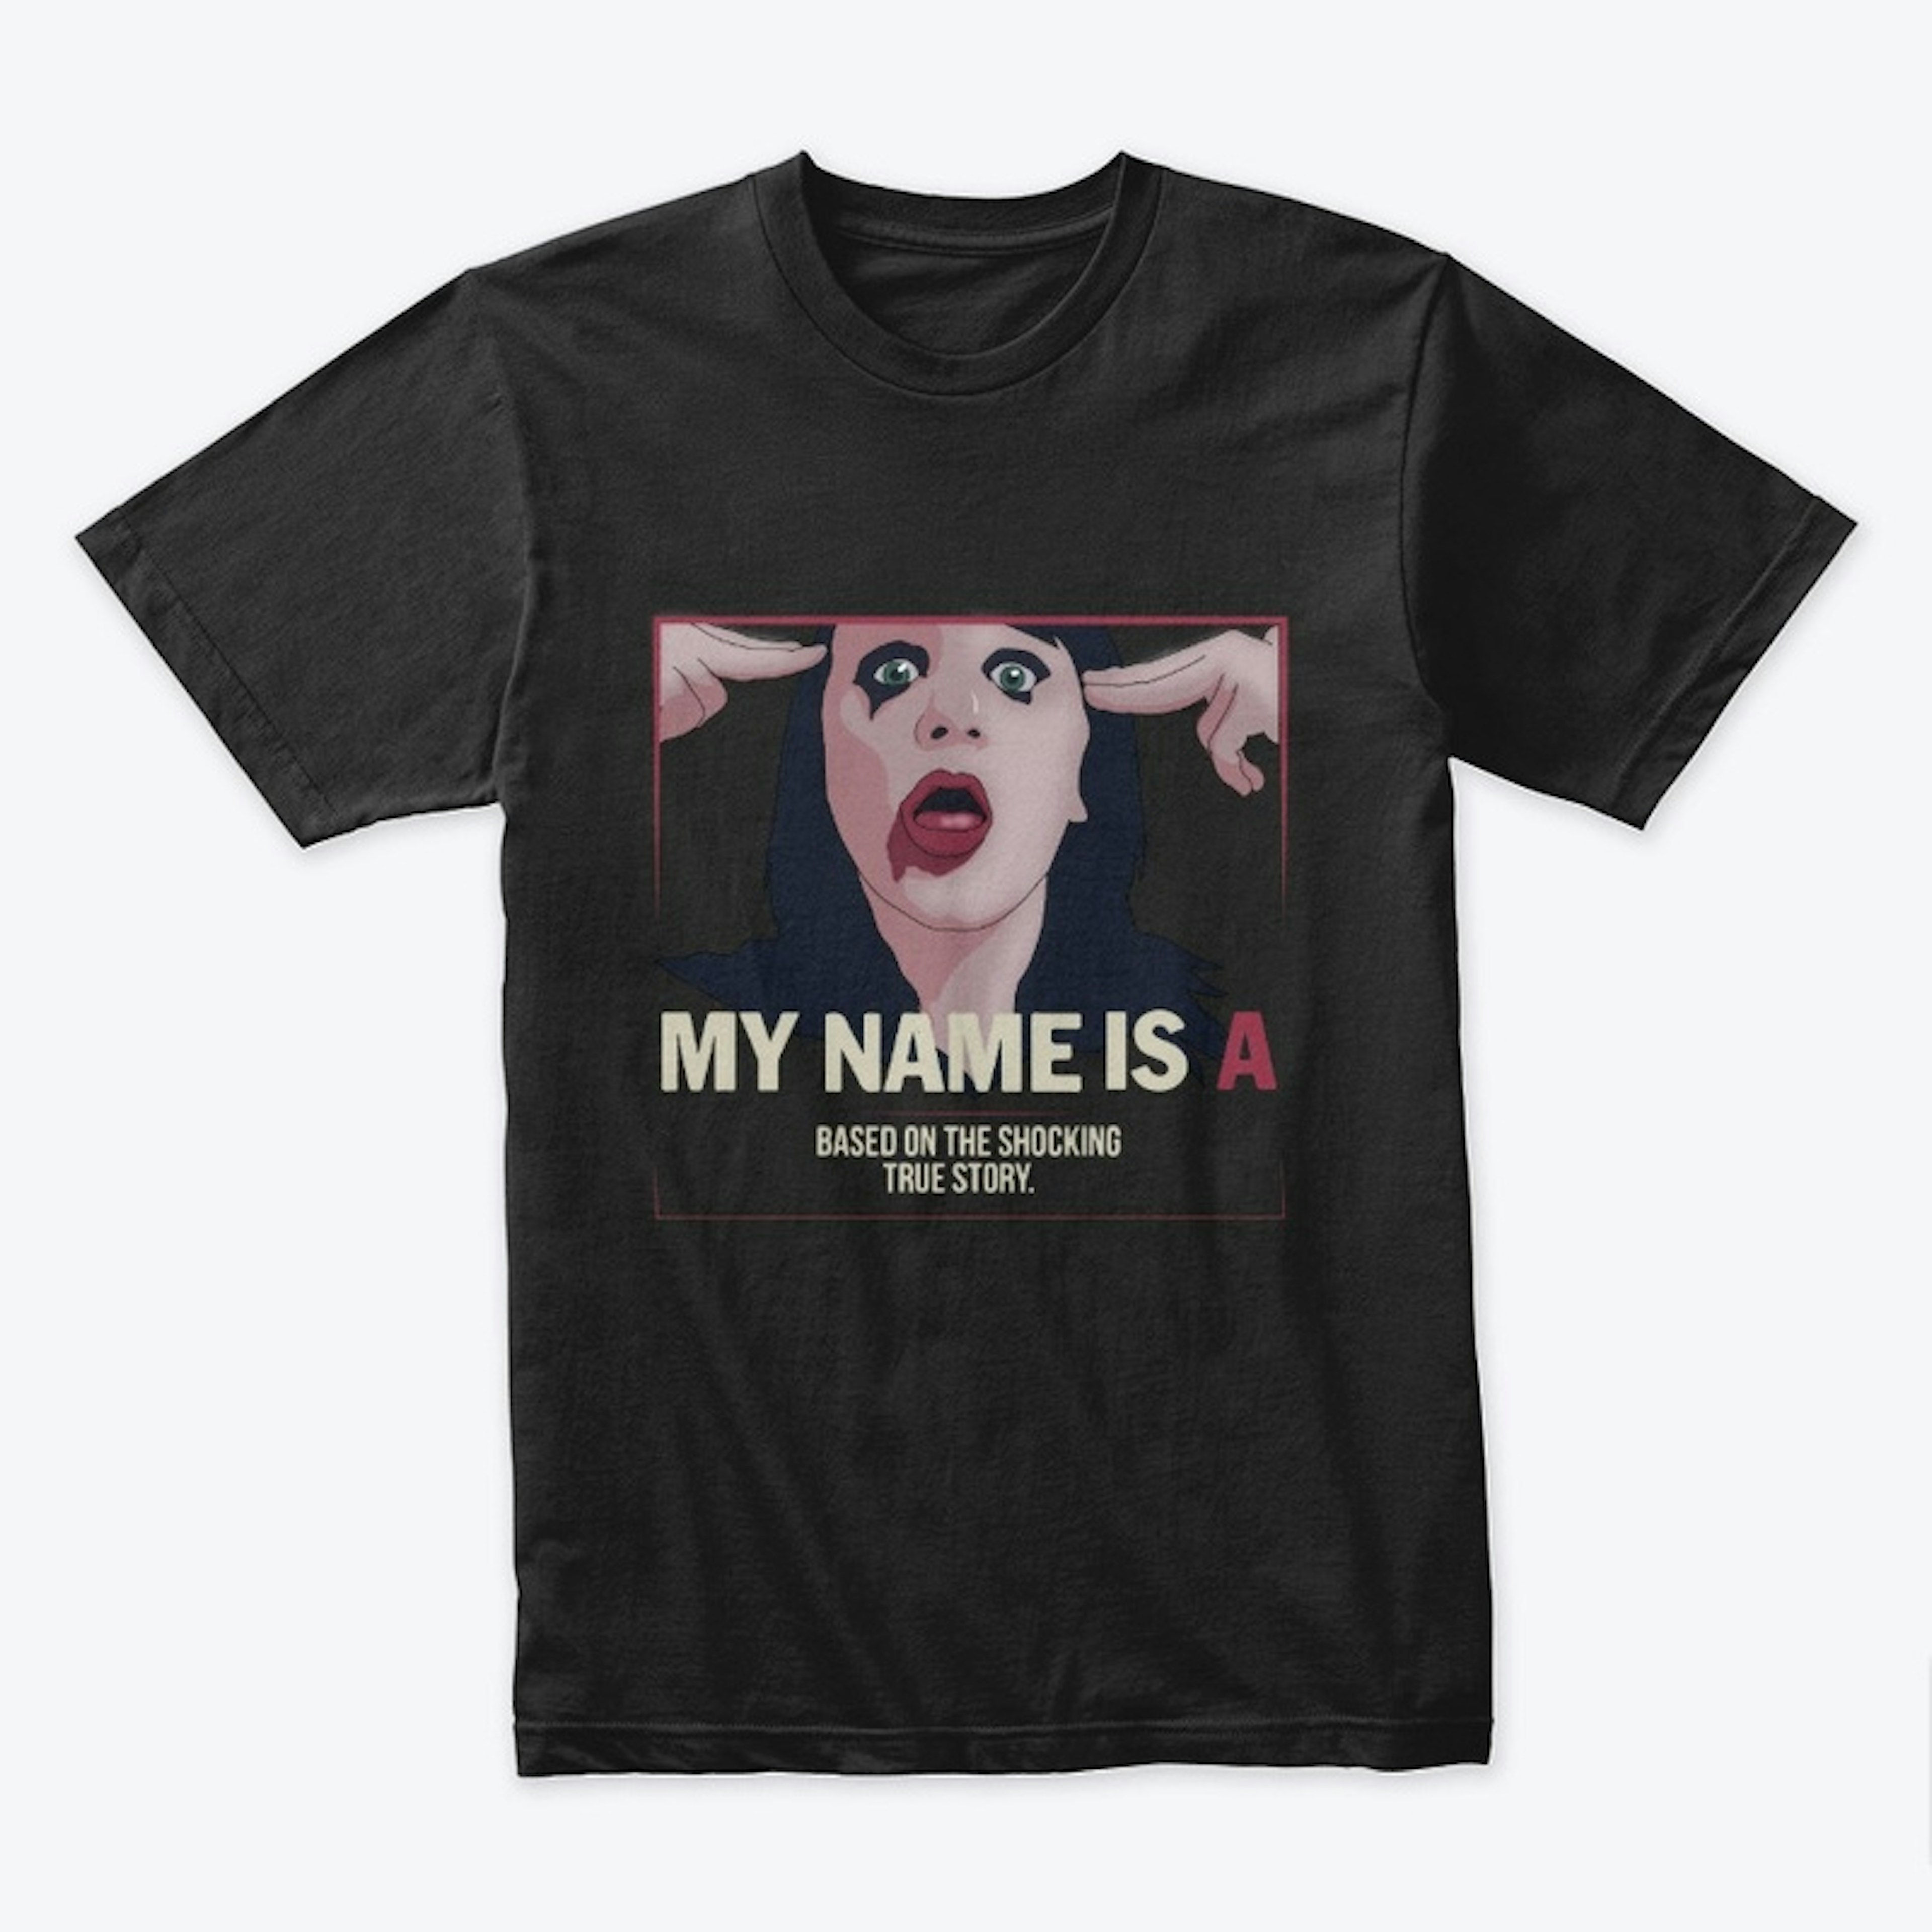 My Name is 'A' by anonymous - film merch